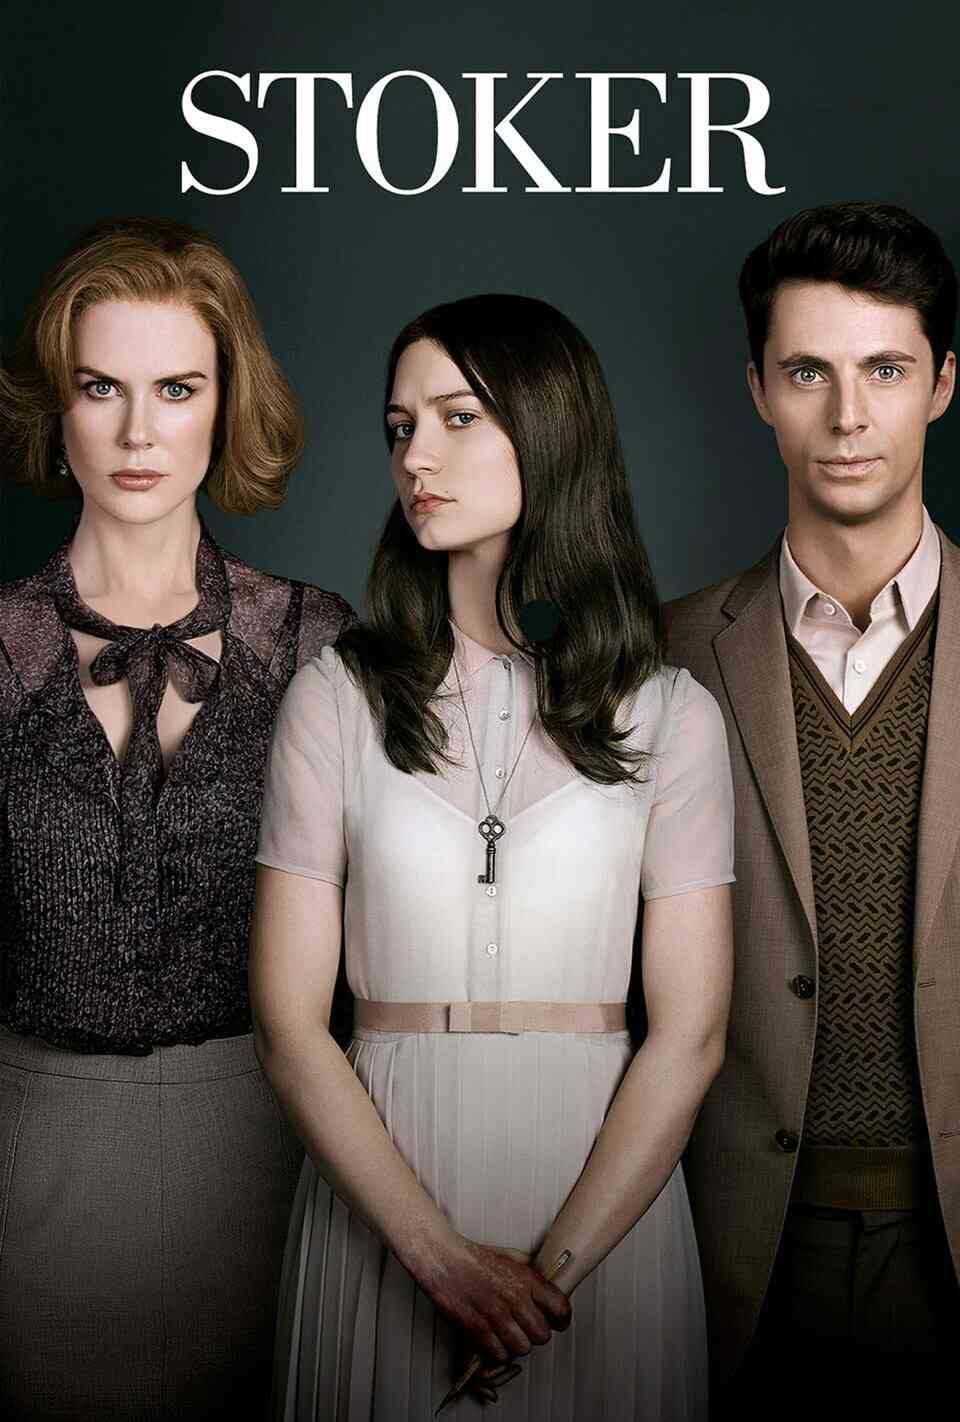 Read Stoker screenplay (poster)